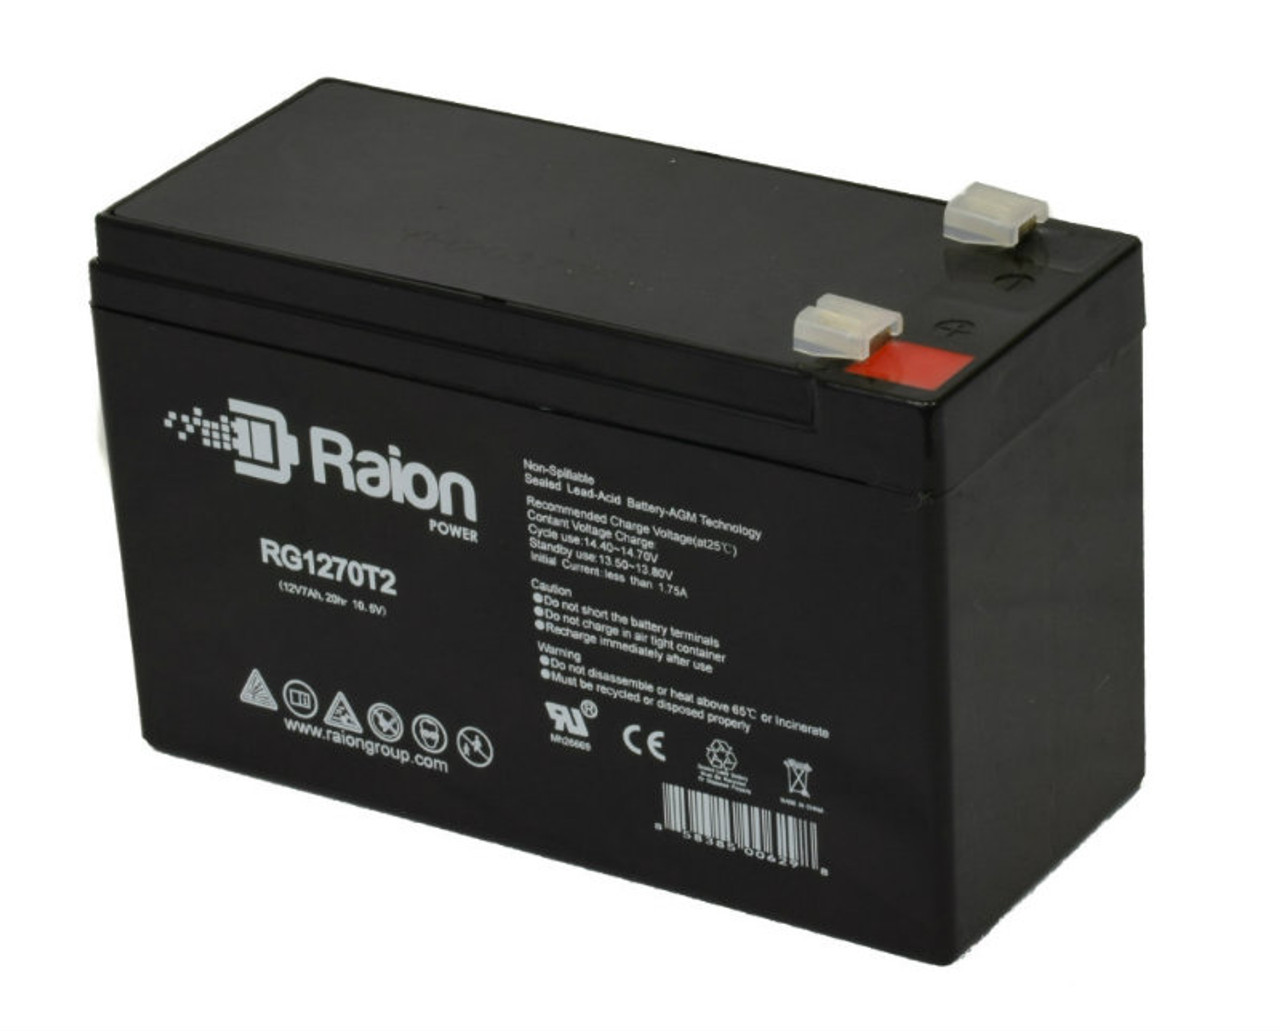 Raion Power Replacement 12V 7Ah Battery for Parks Electronics Labs 1103 Compressor - 1 Pack